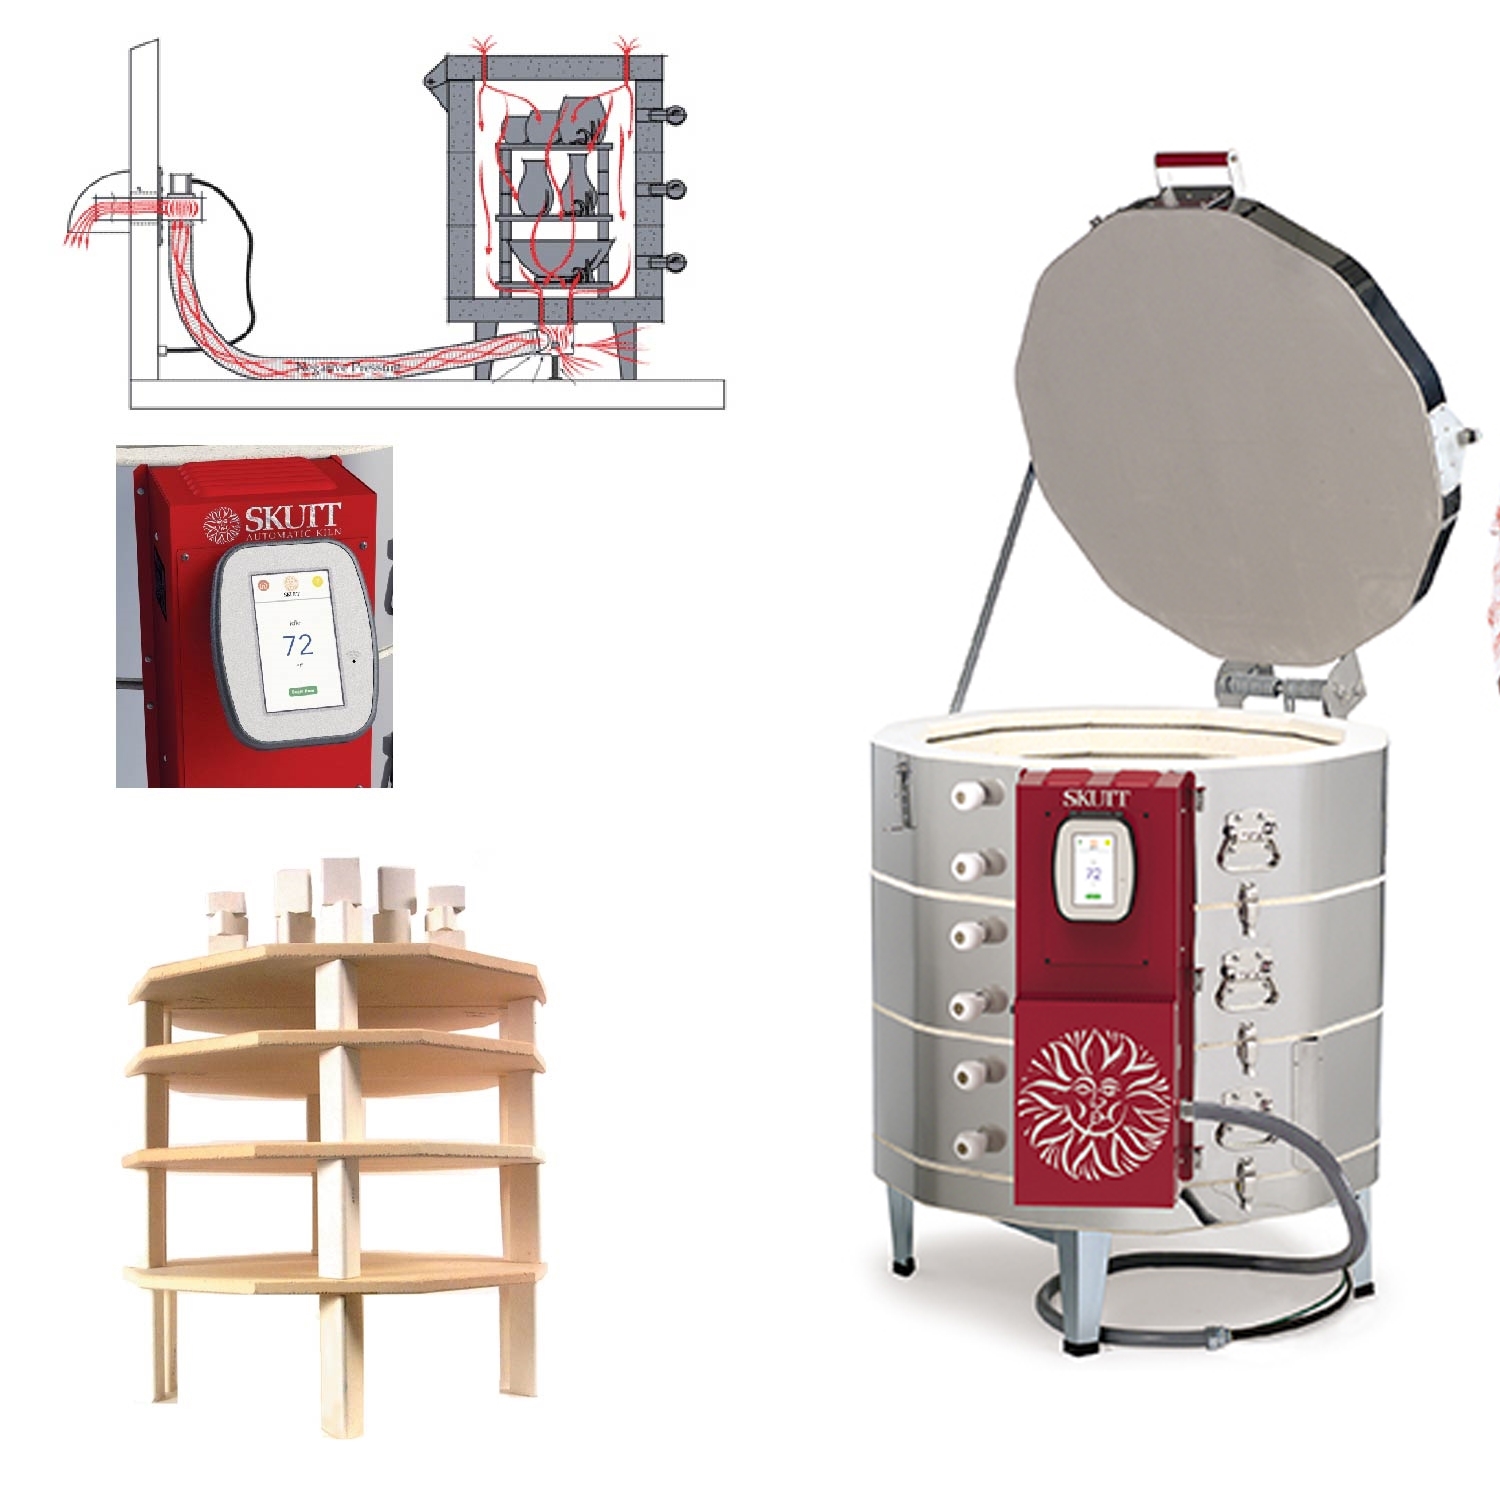 Skutt KMT1227-3PK Kiln Package with Touch-Screen Controller, Vent and 1" Furniture Kit